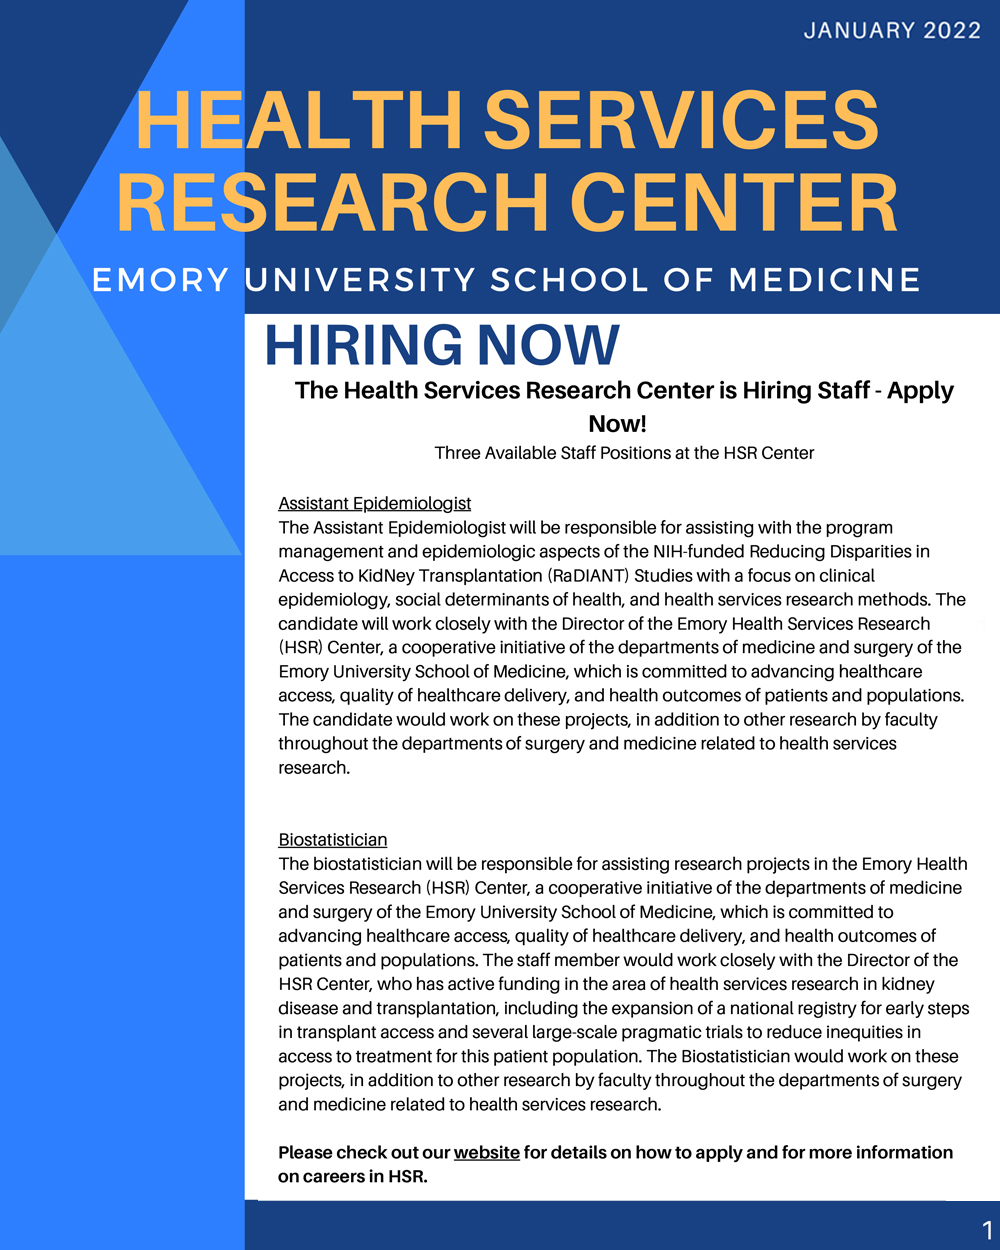 January 2022 Health Services Research Center Newsletter 